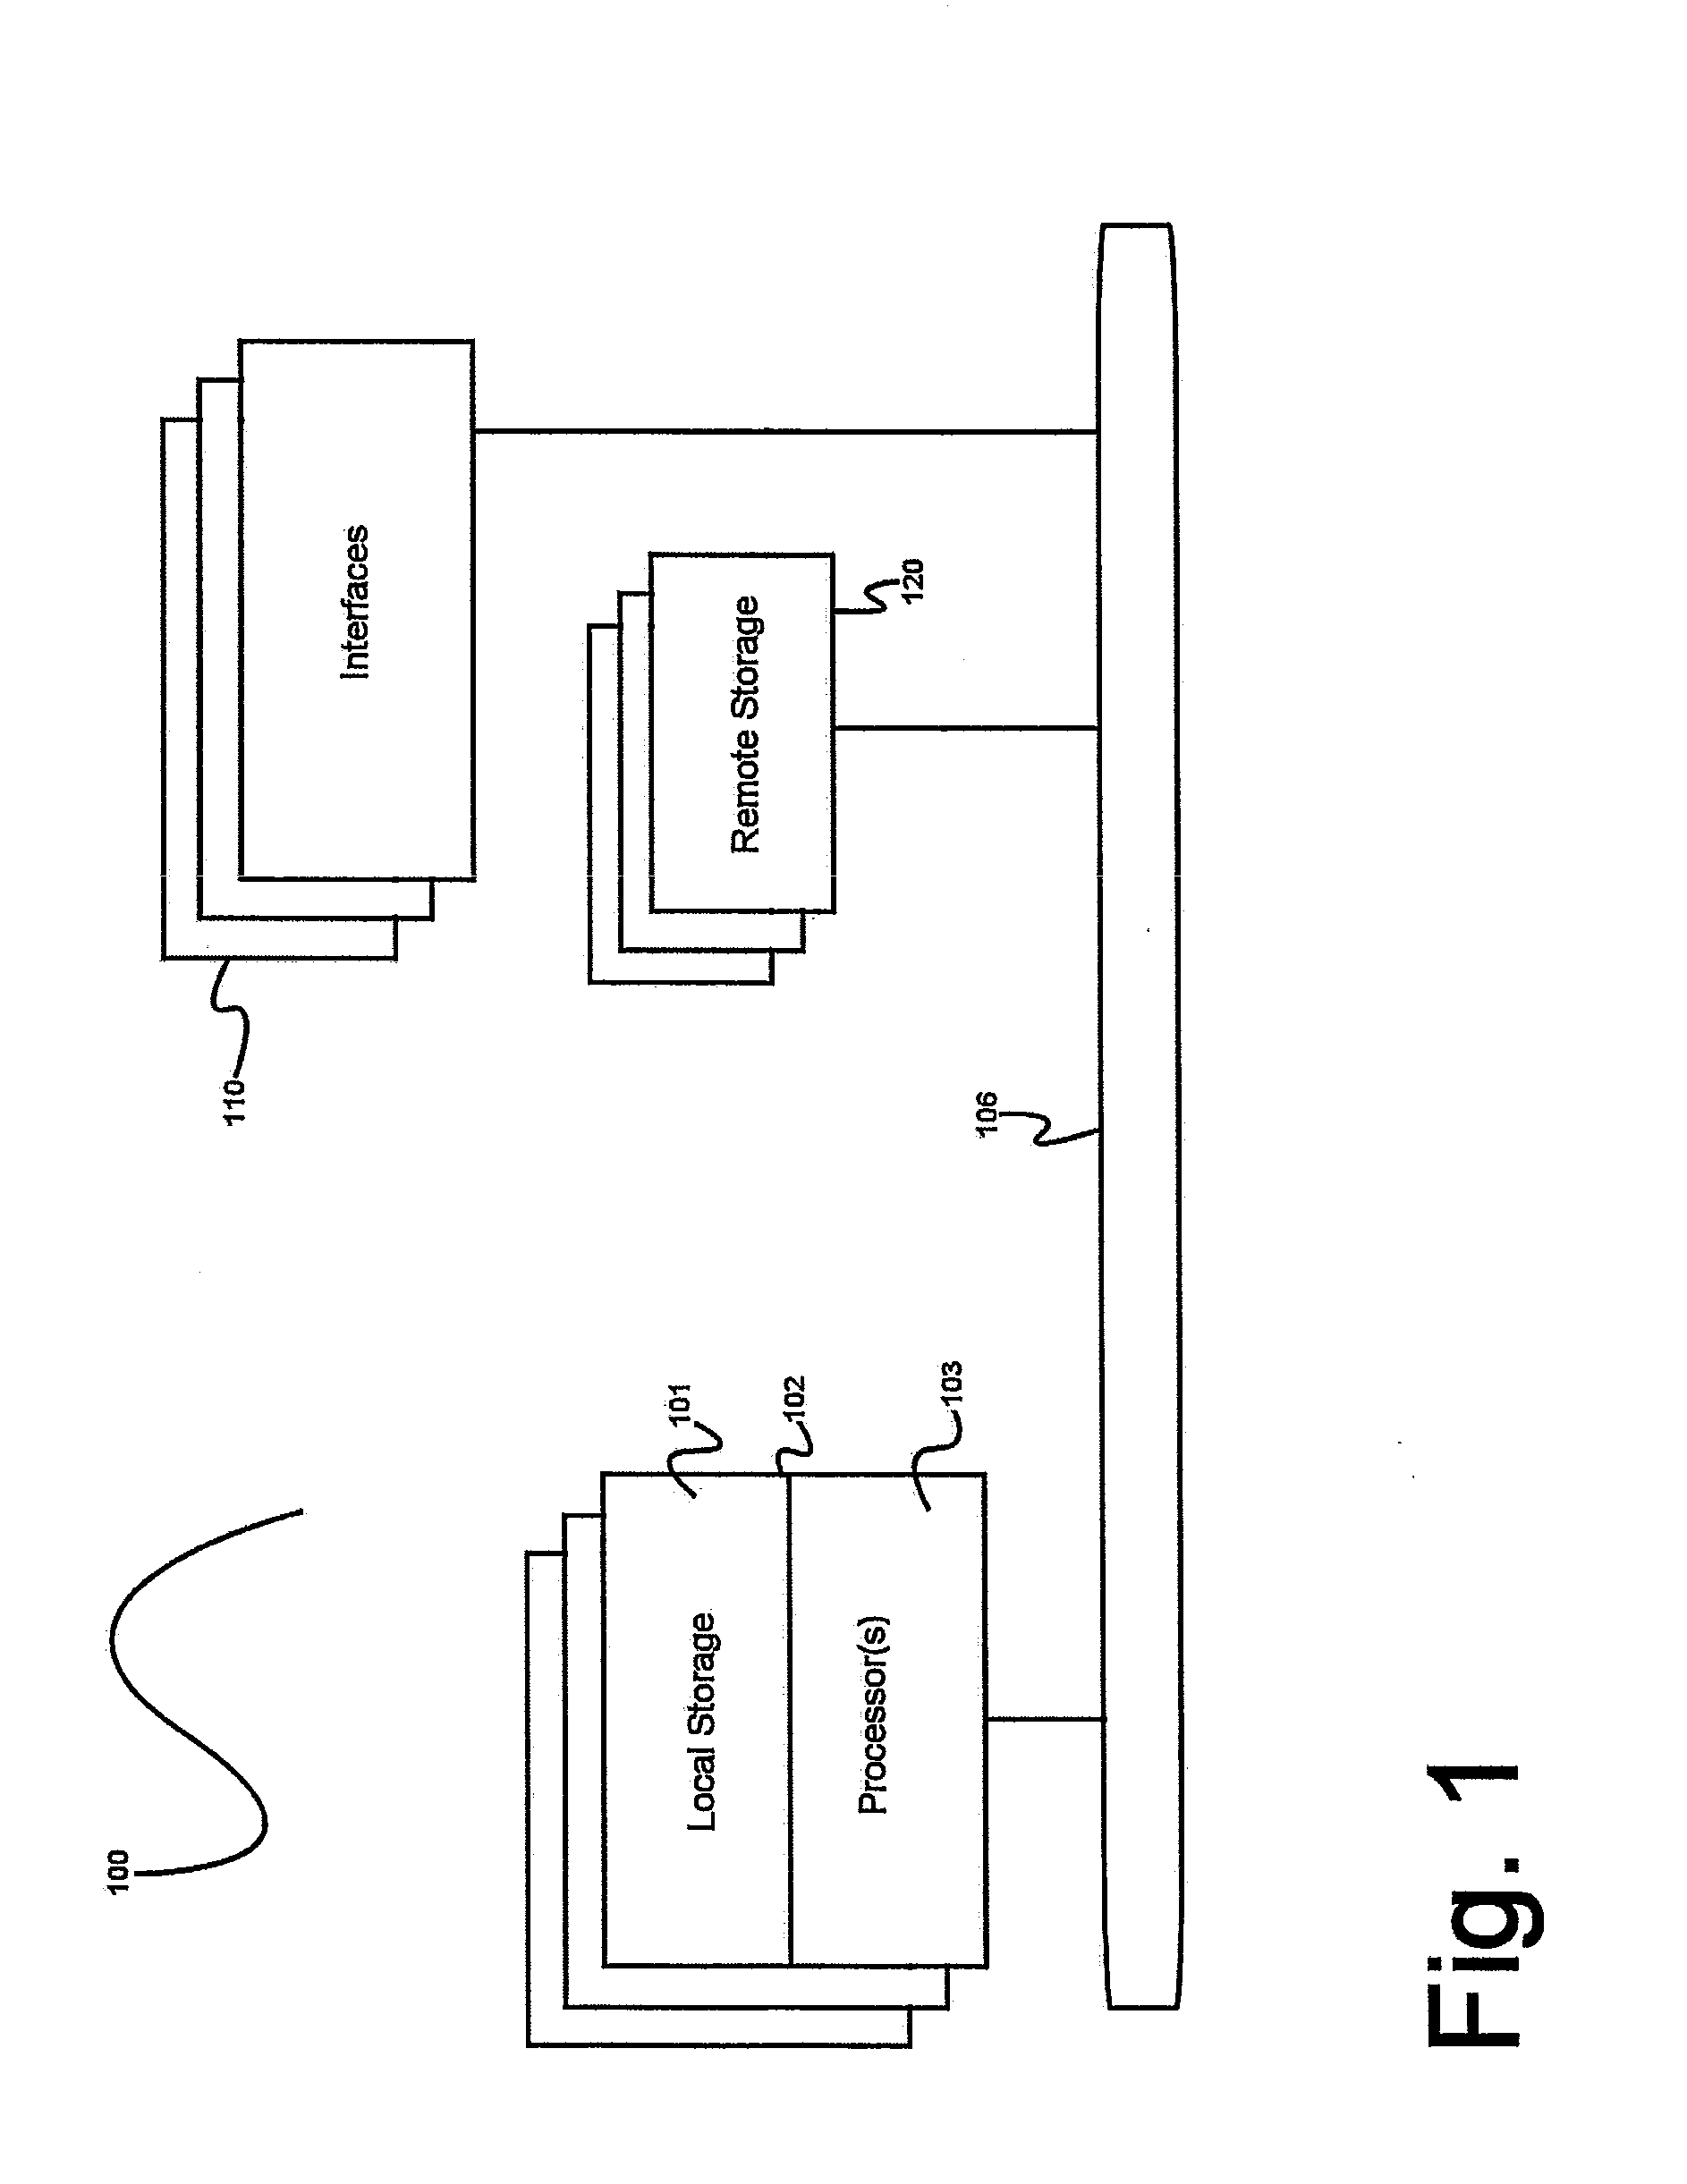 System and methods for virtual assistant networks